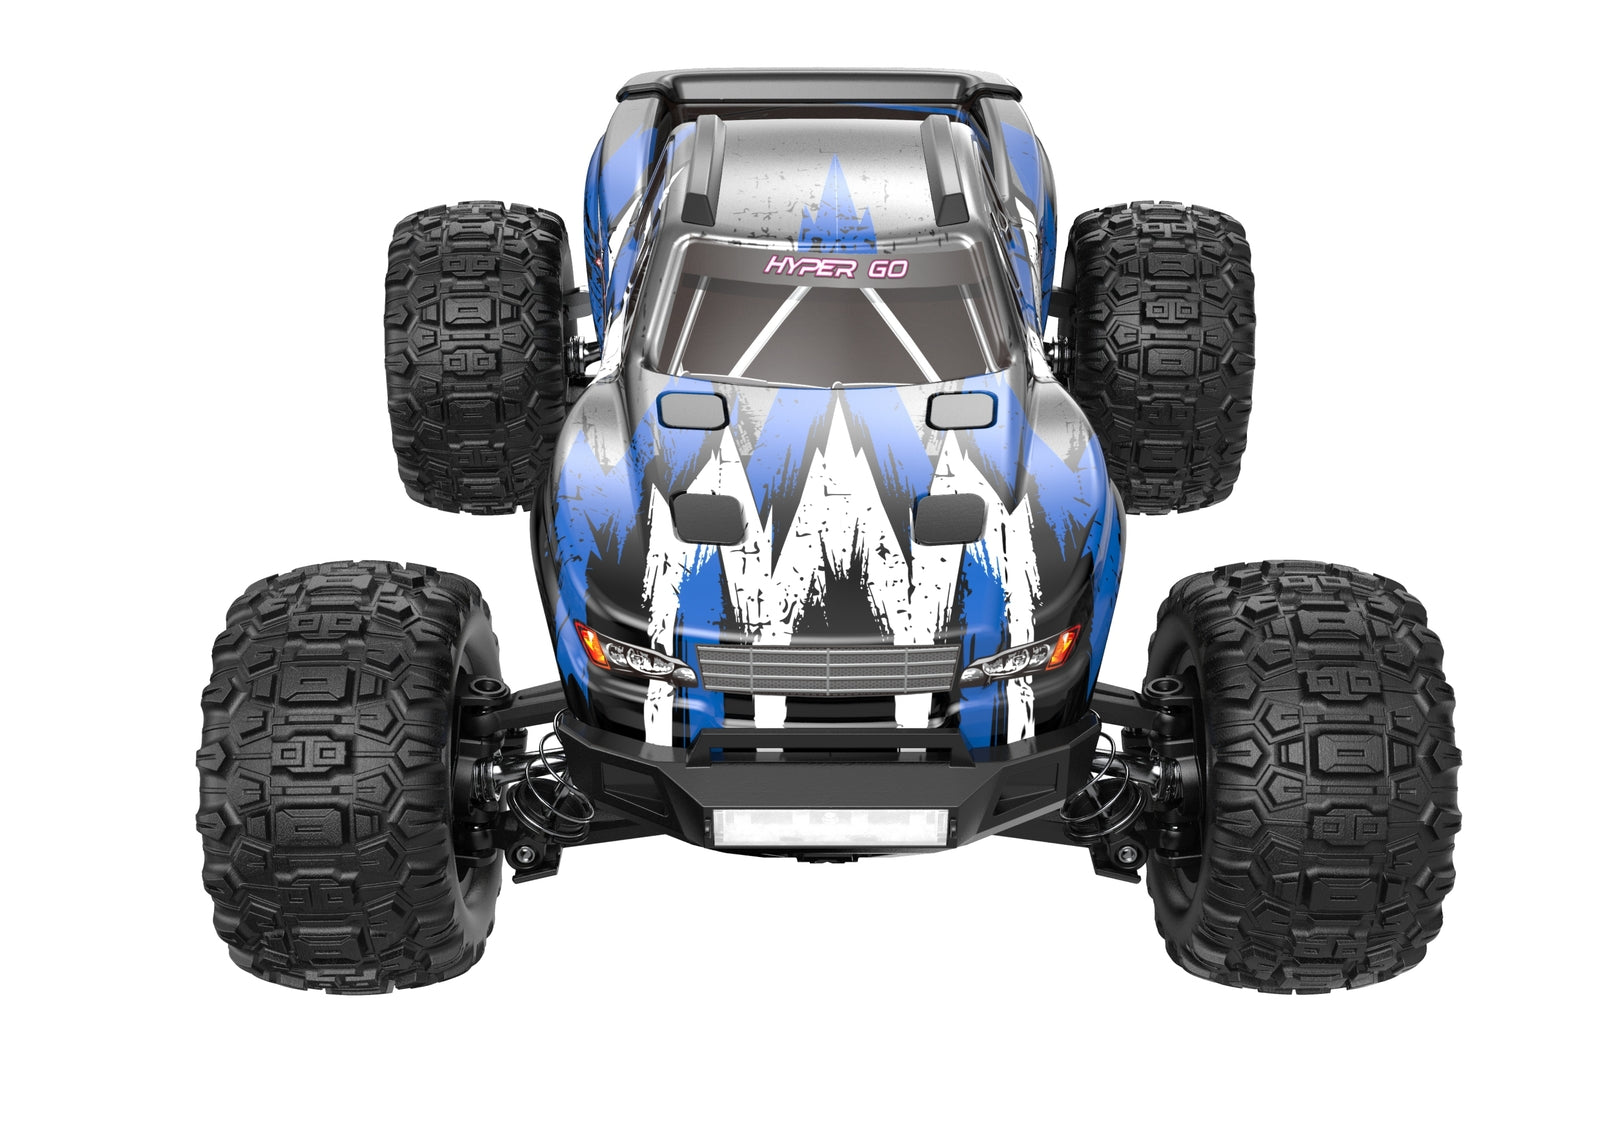 MJX 1/16 RTR Brushed RC Monster Truck with GPS (Blue) [H16H-1] - [Sunshine-Coast] - MJX - [RC-Car] - [Scale-Model]